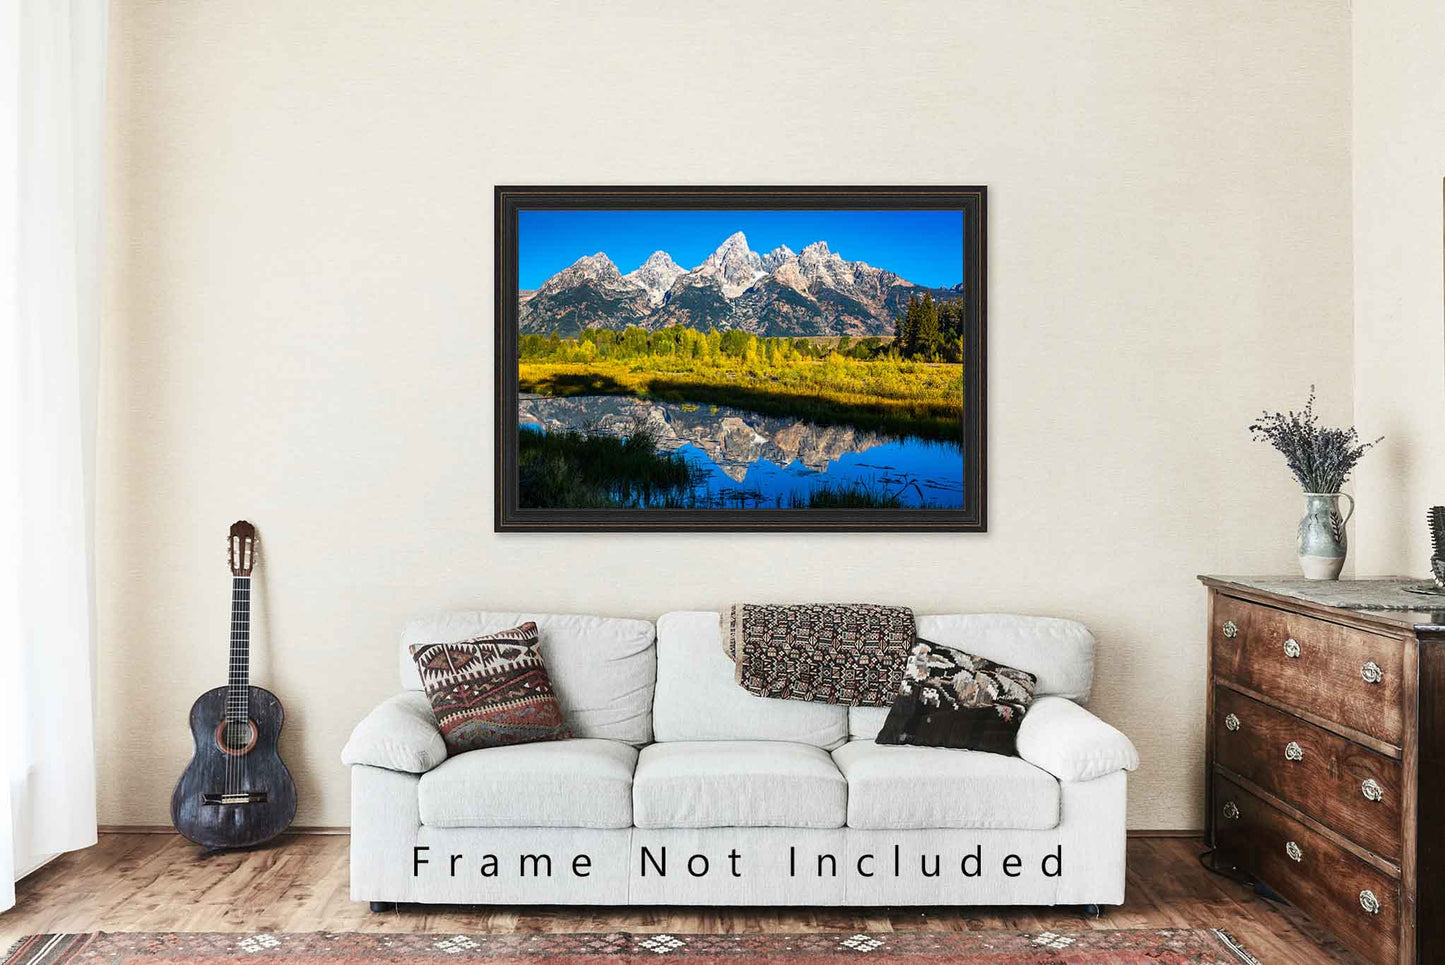 Rocky Mountain Photography Print (Not Framed) Picture of Grand Teton at Schwabacher Landing in Wyoming Landscape Wall Art Western Decor